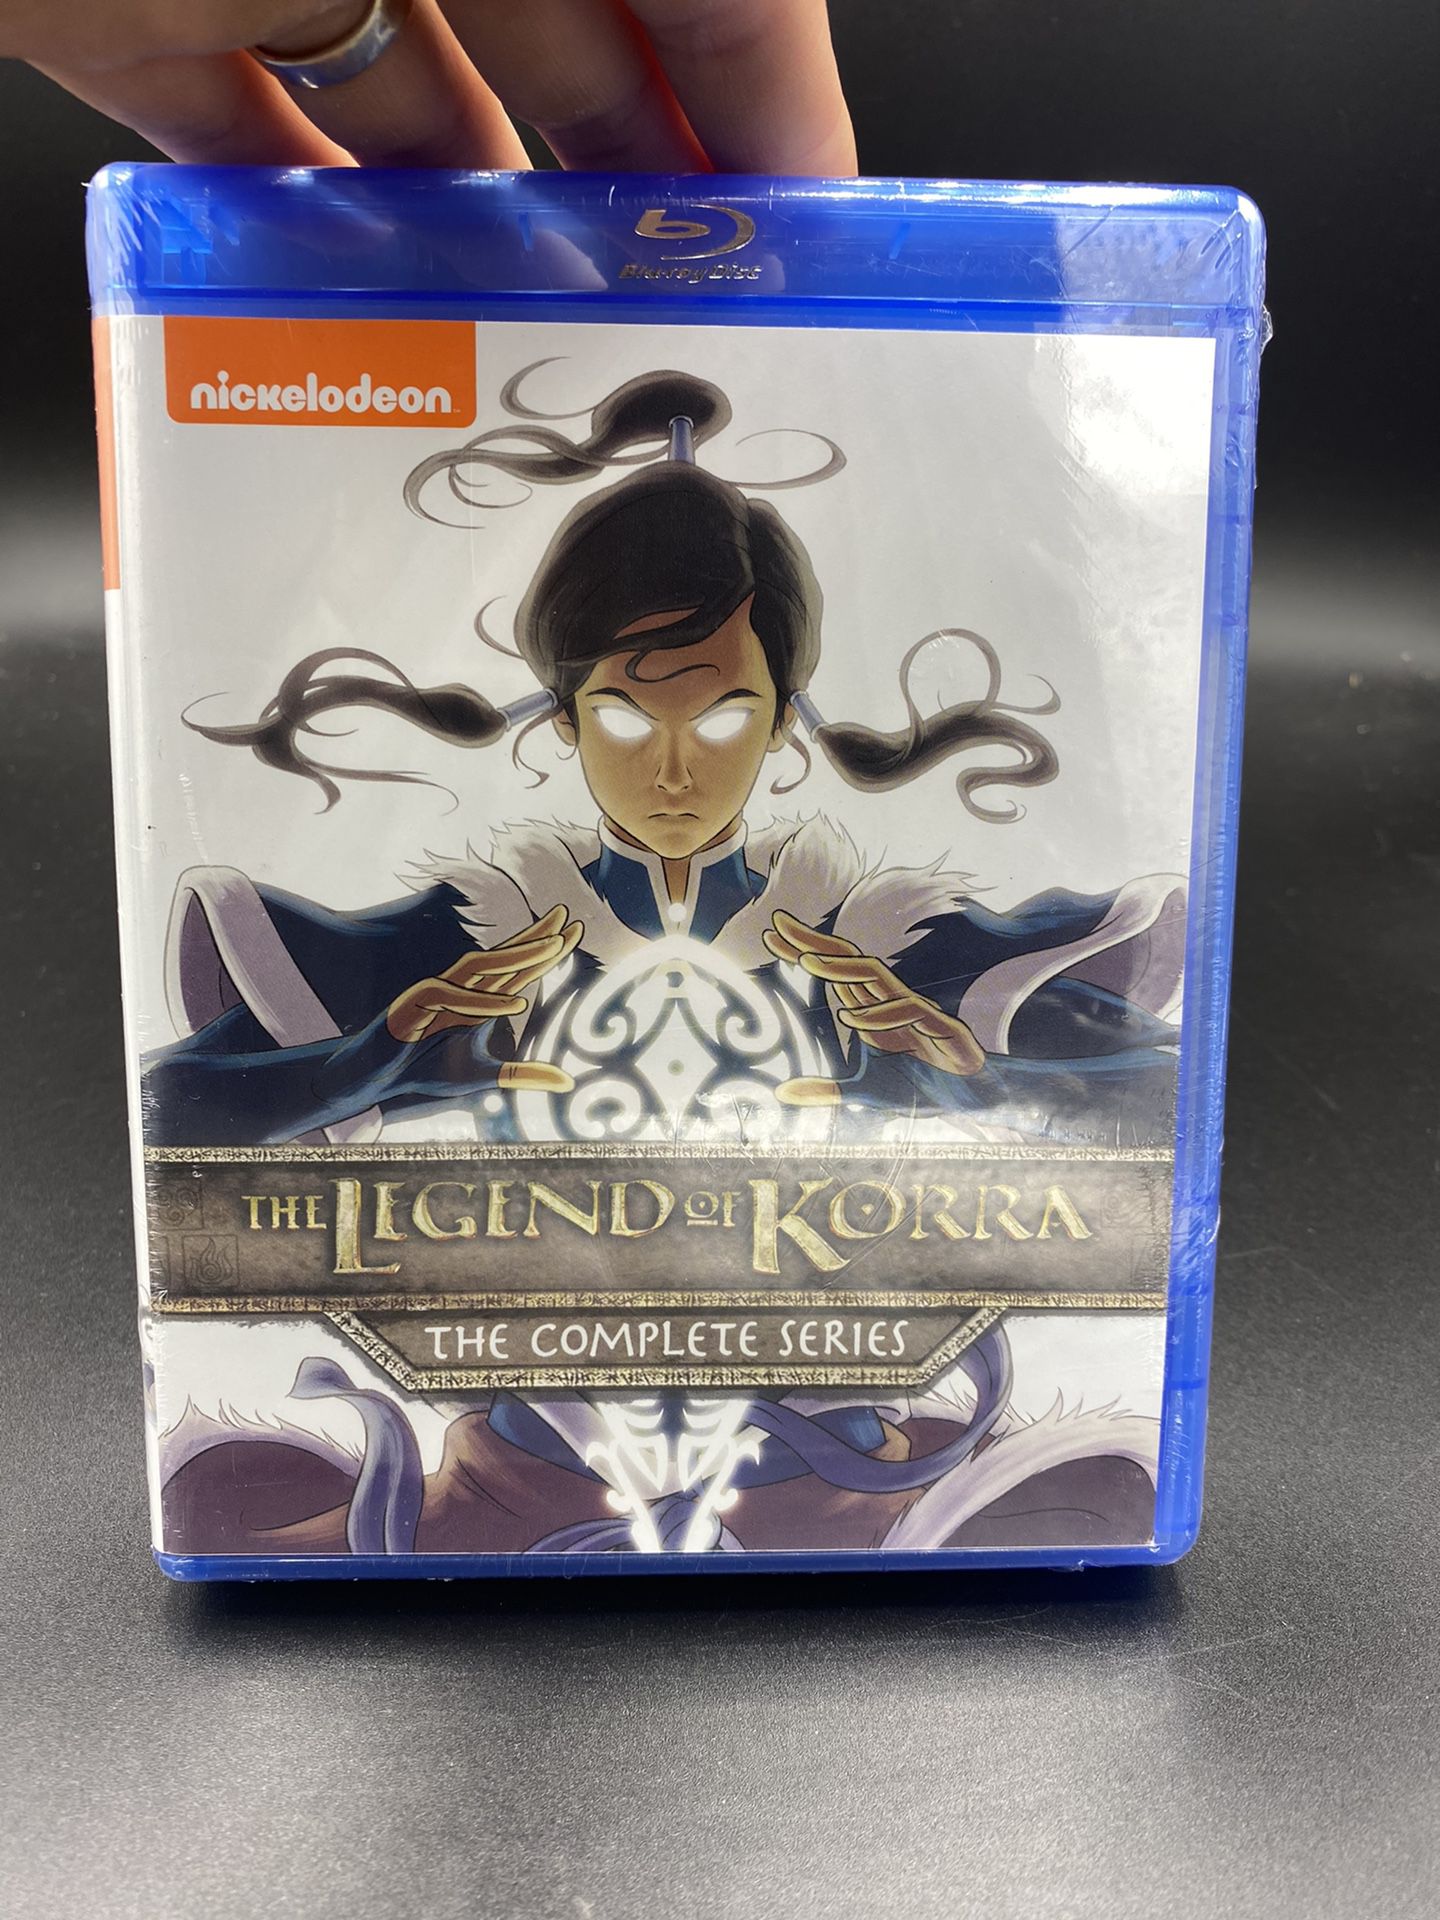 Nickelodeon The Legend of Korra: The Complete Series (Blu-ray) - Brand New